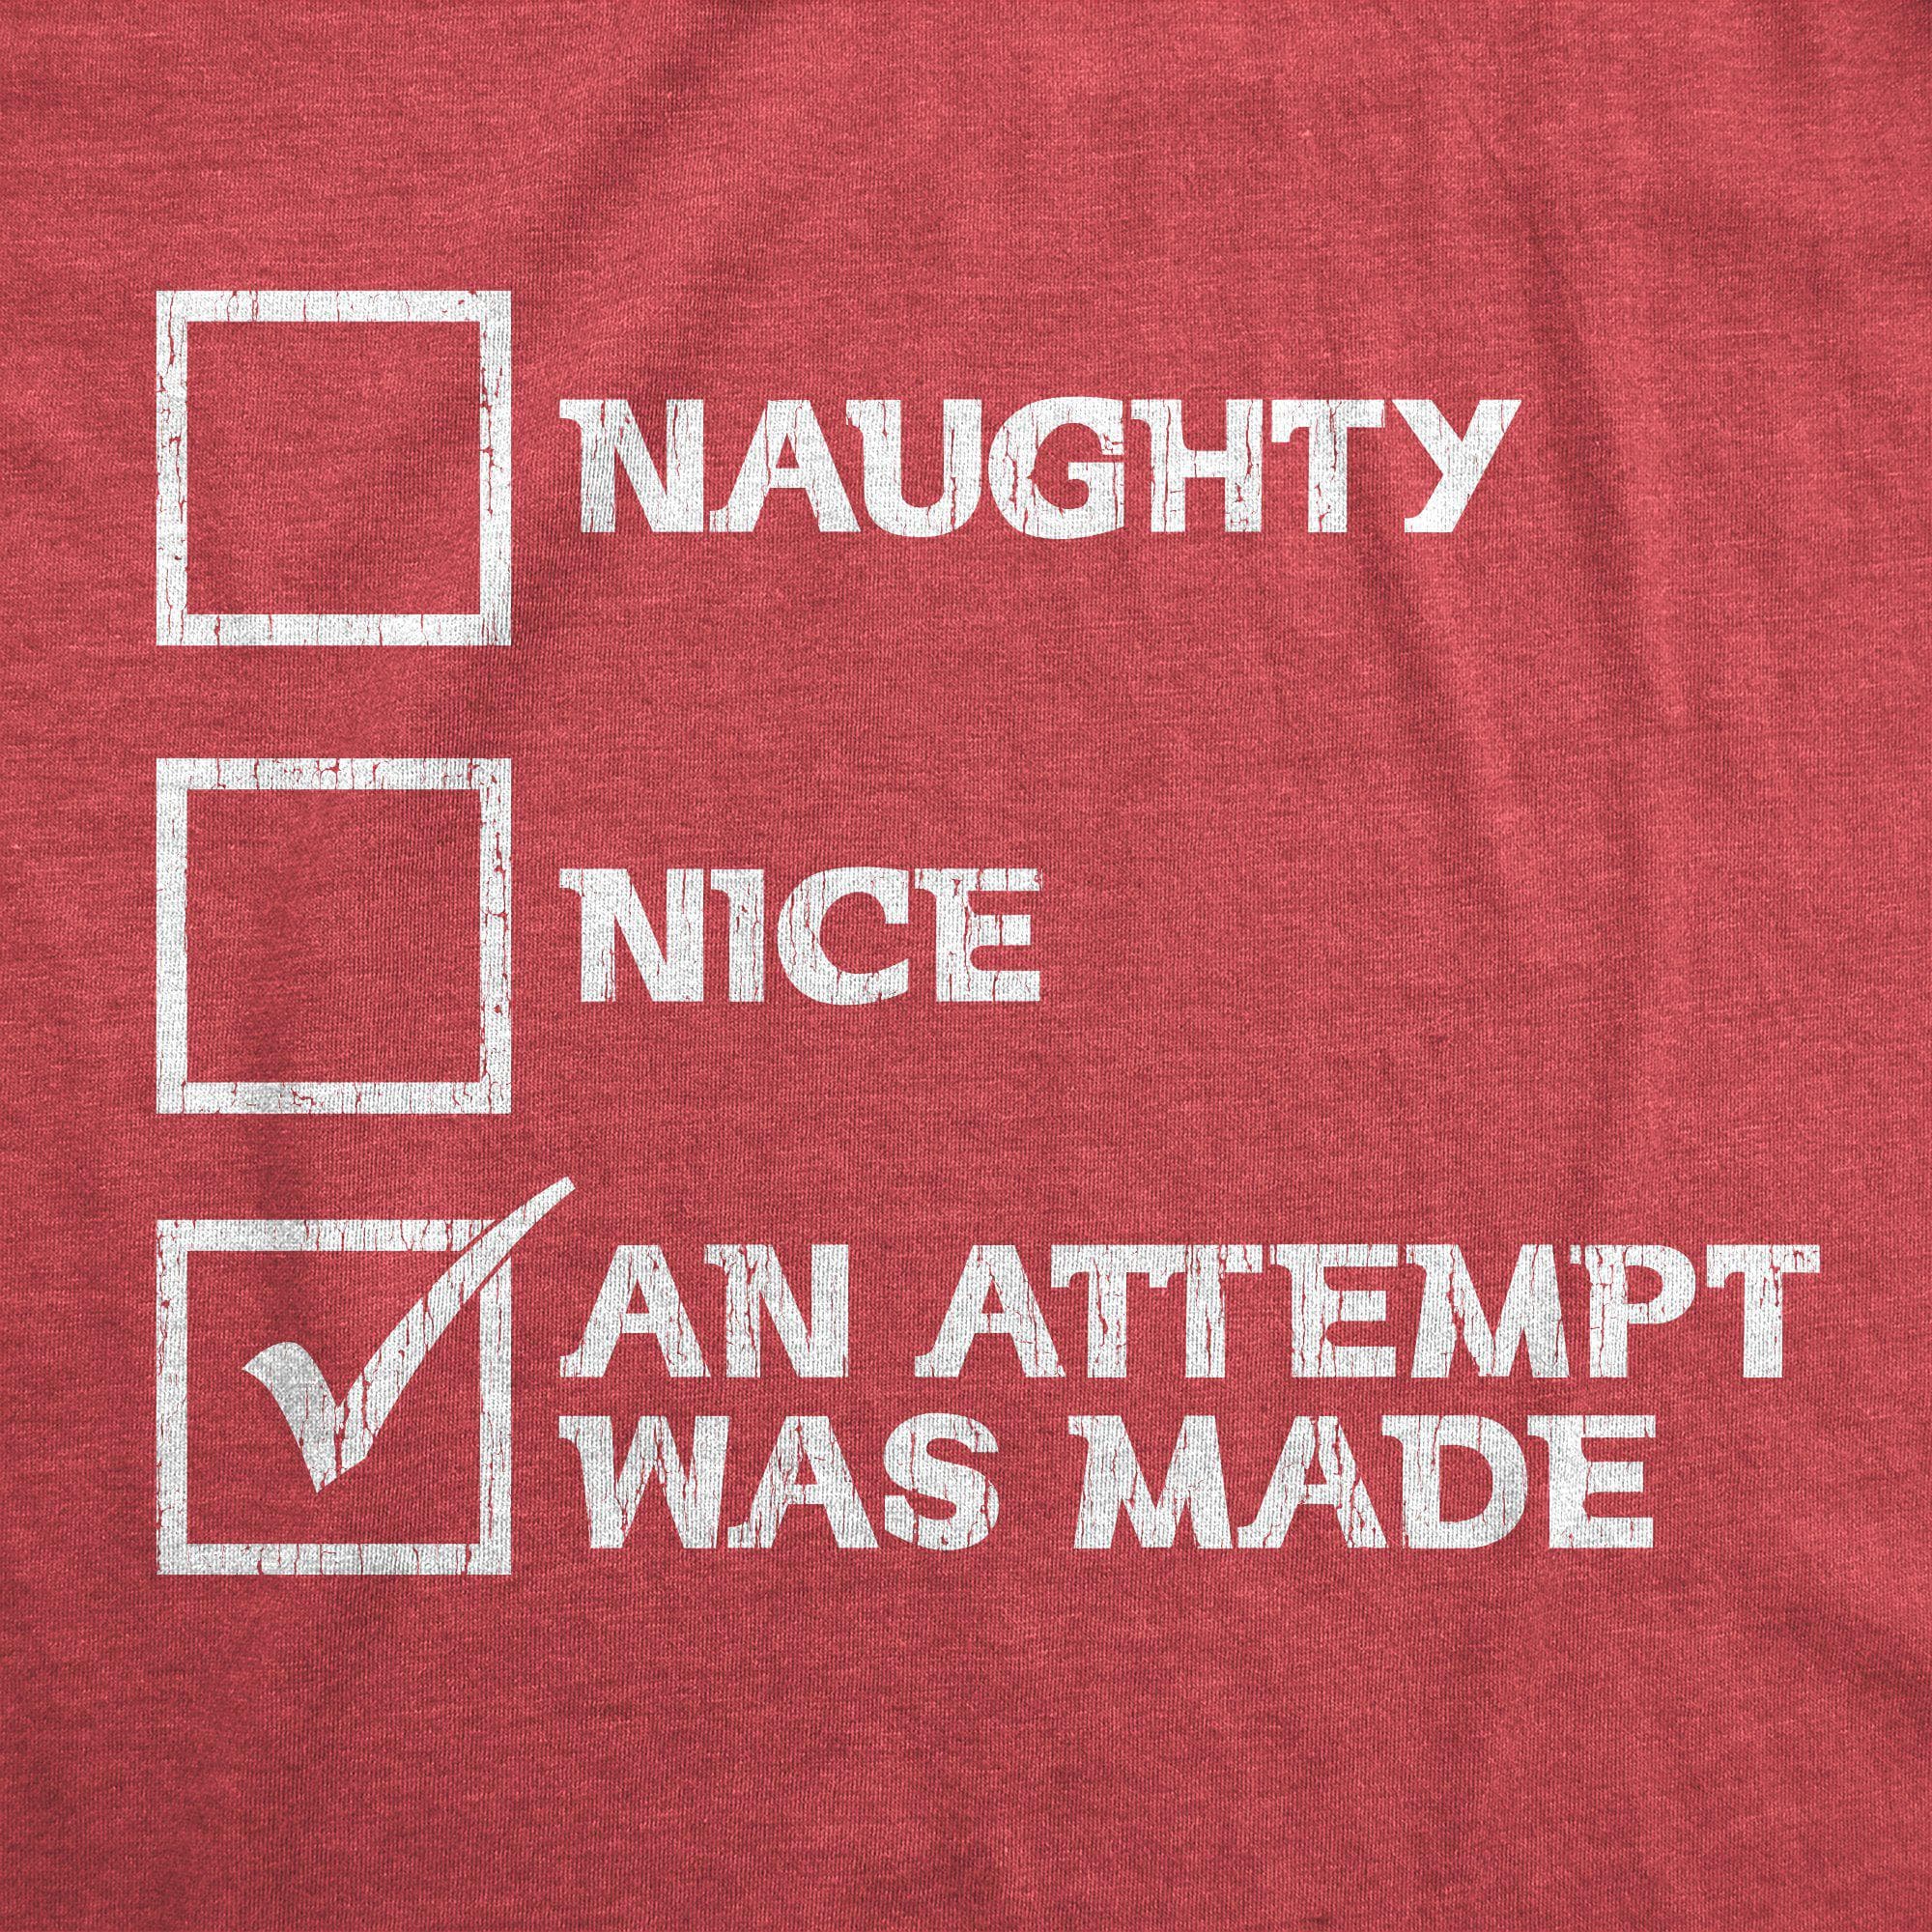 Naughty Nice An Attempt Was Made Men's Tshirt - Crazy Dog T-Shirts